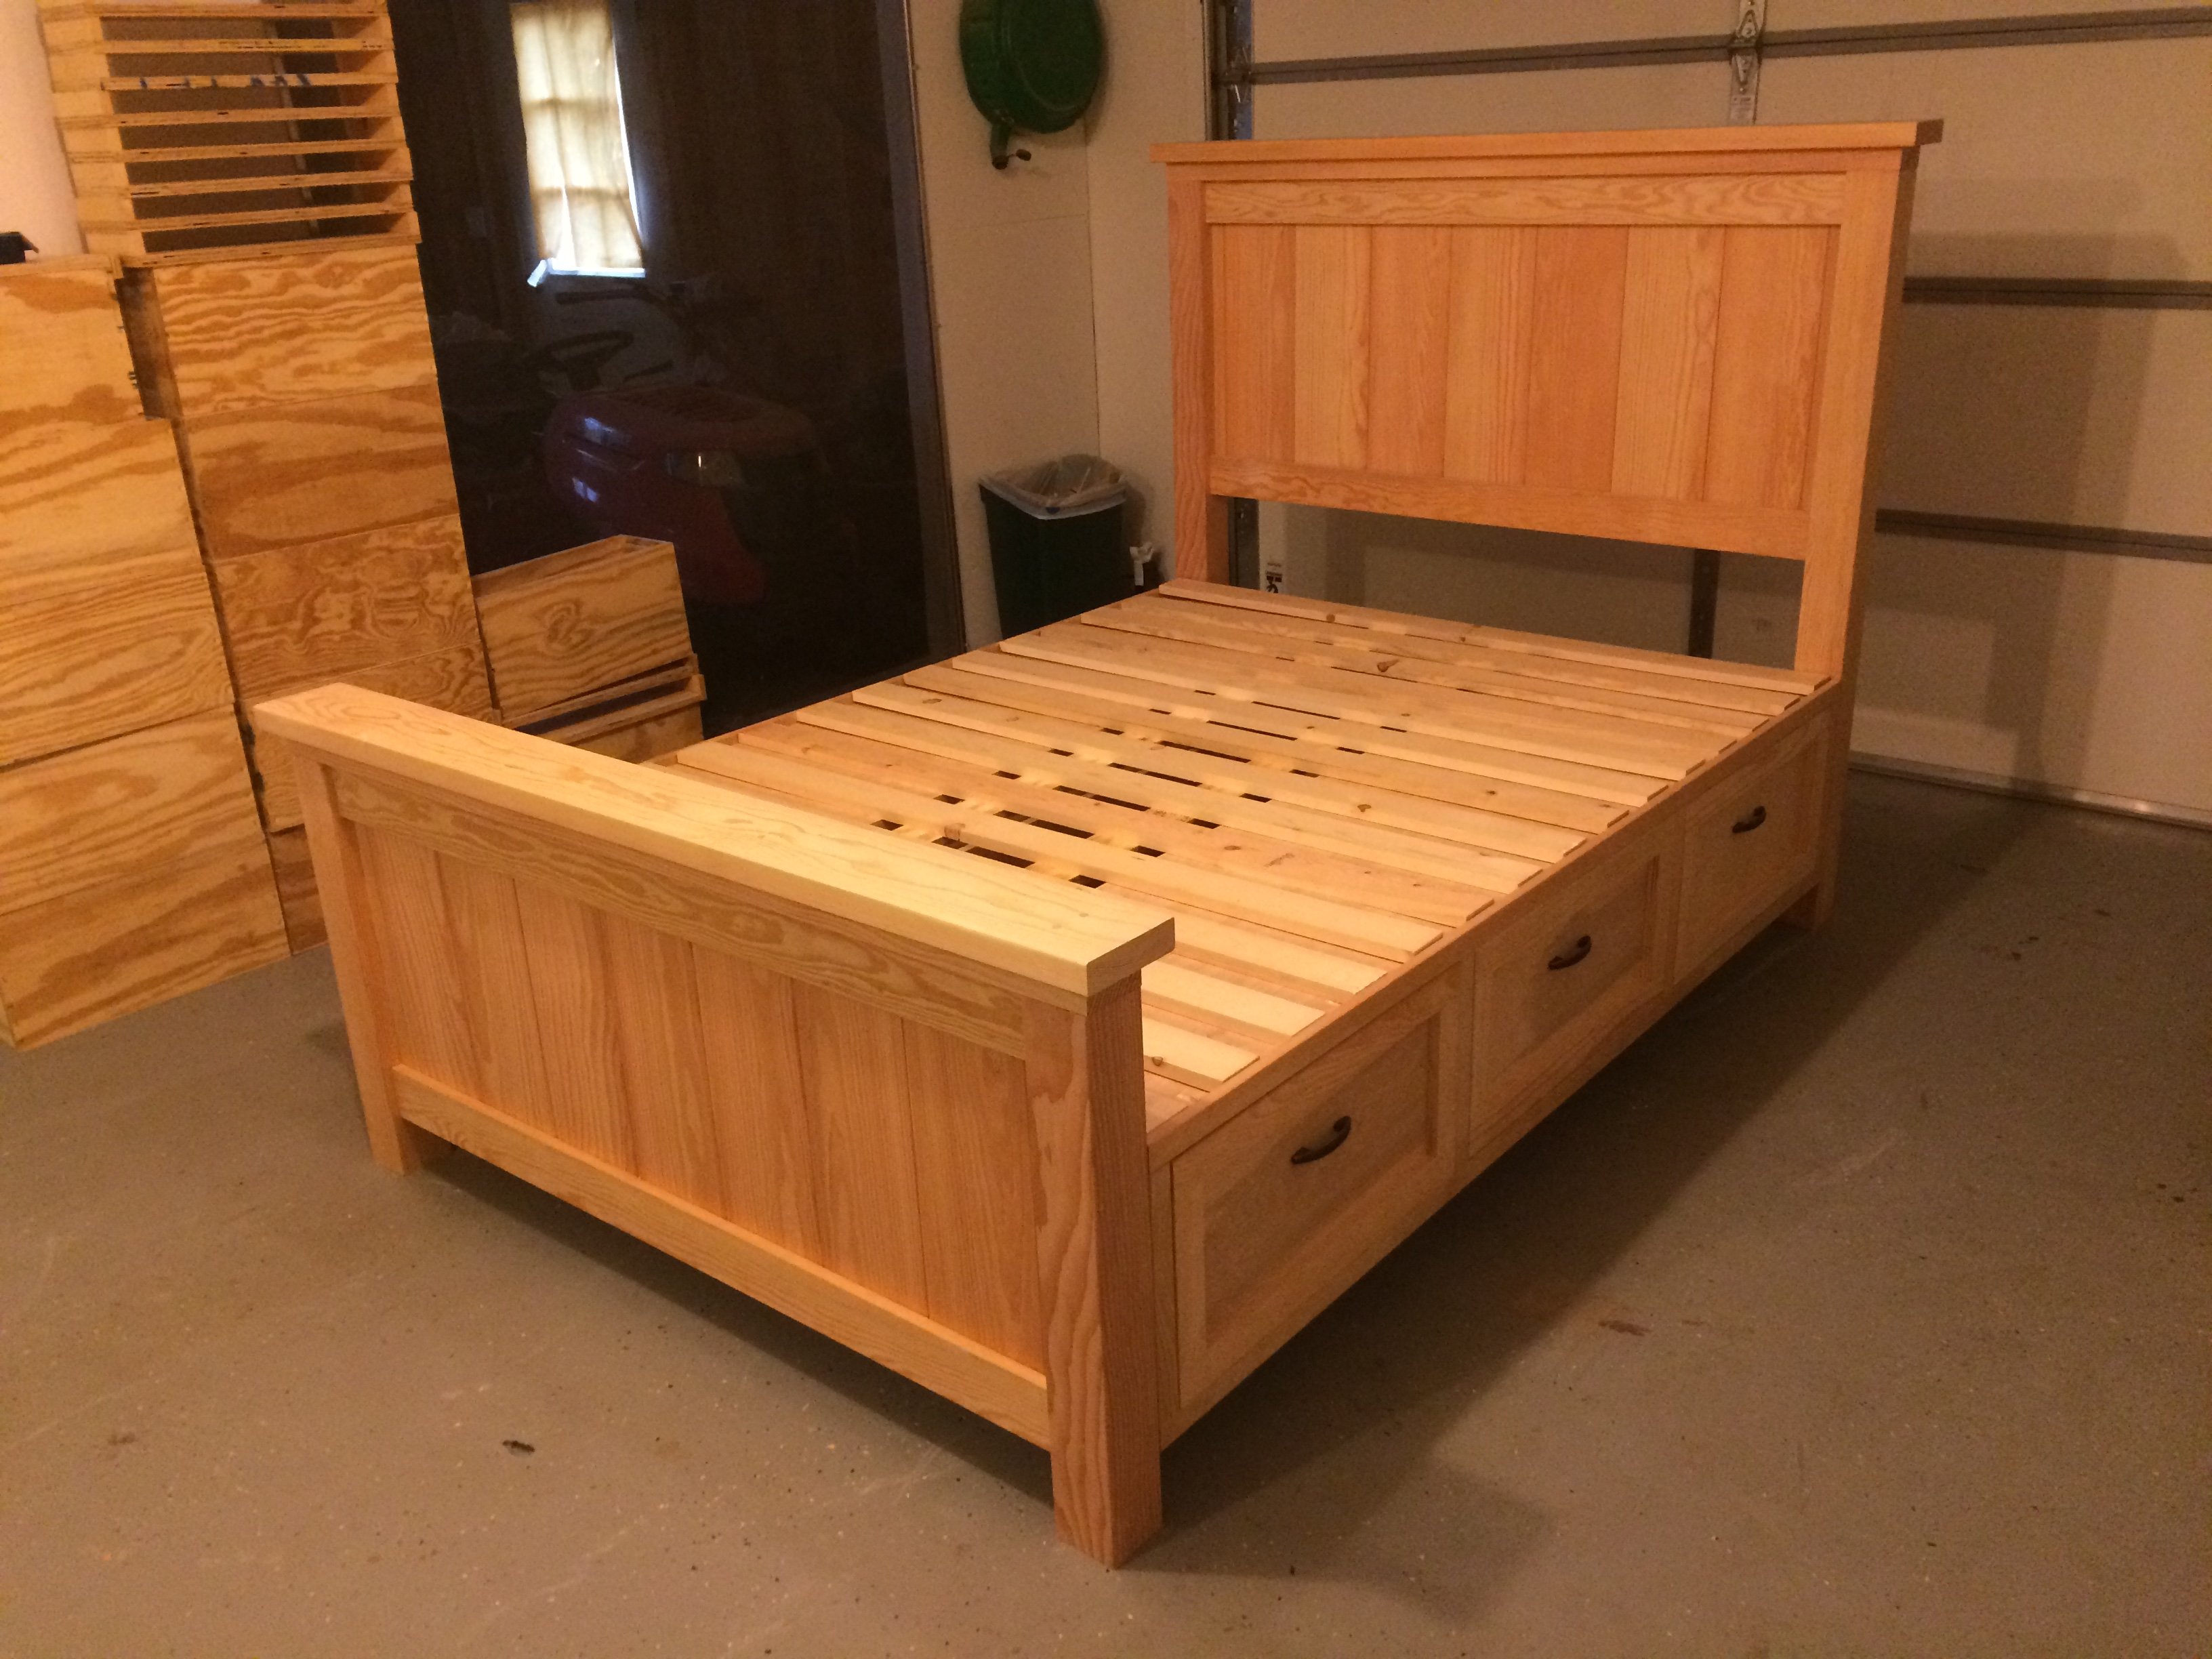 Farmhouse Storage Bed With Drawers, Build King Bed Frame With Storage